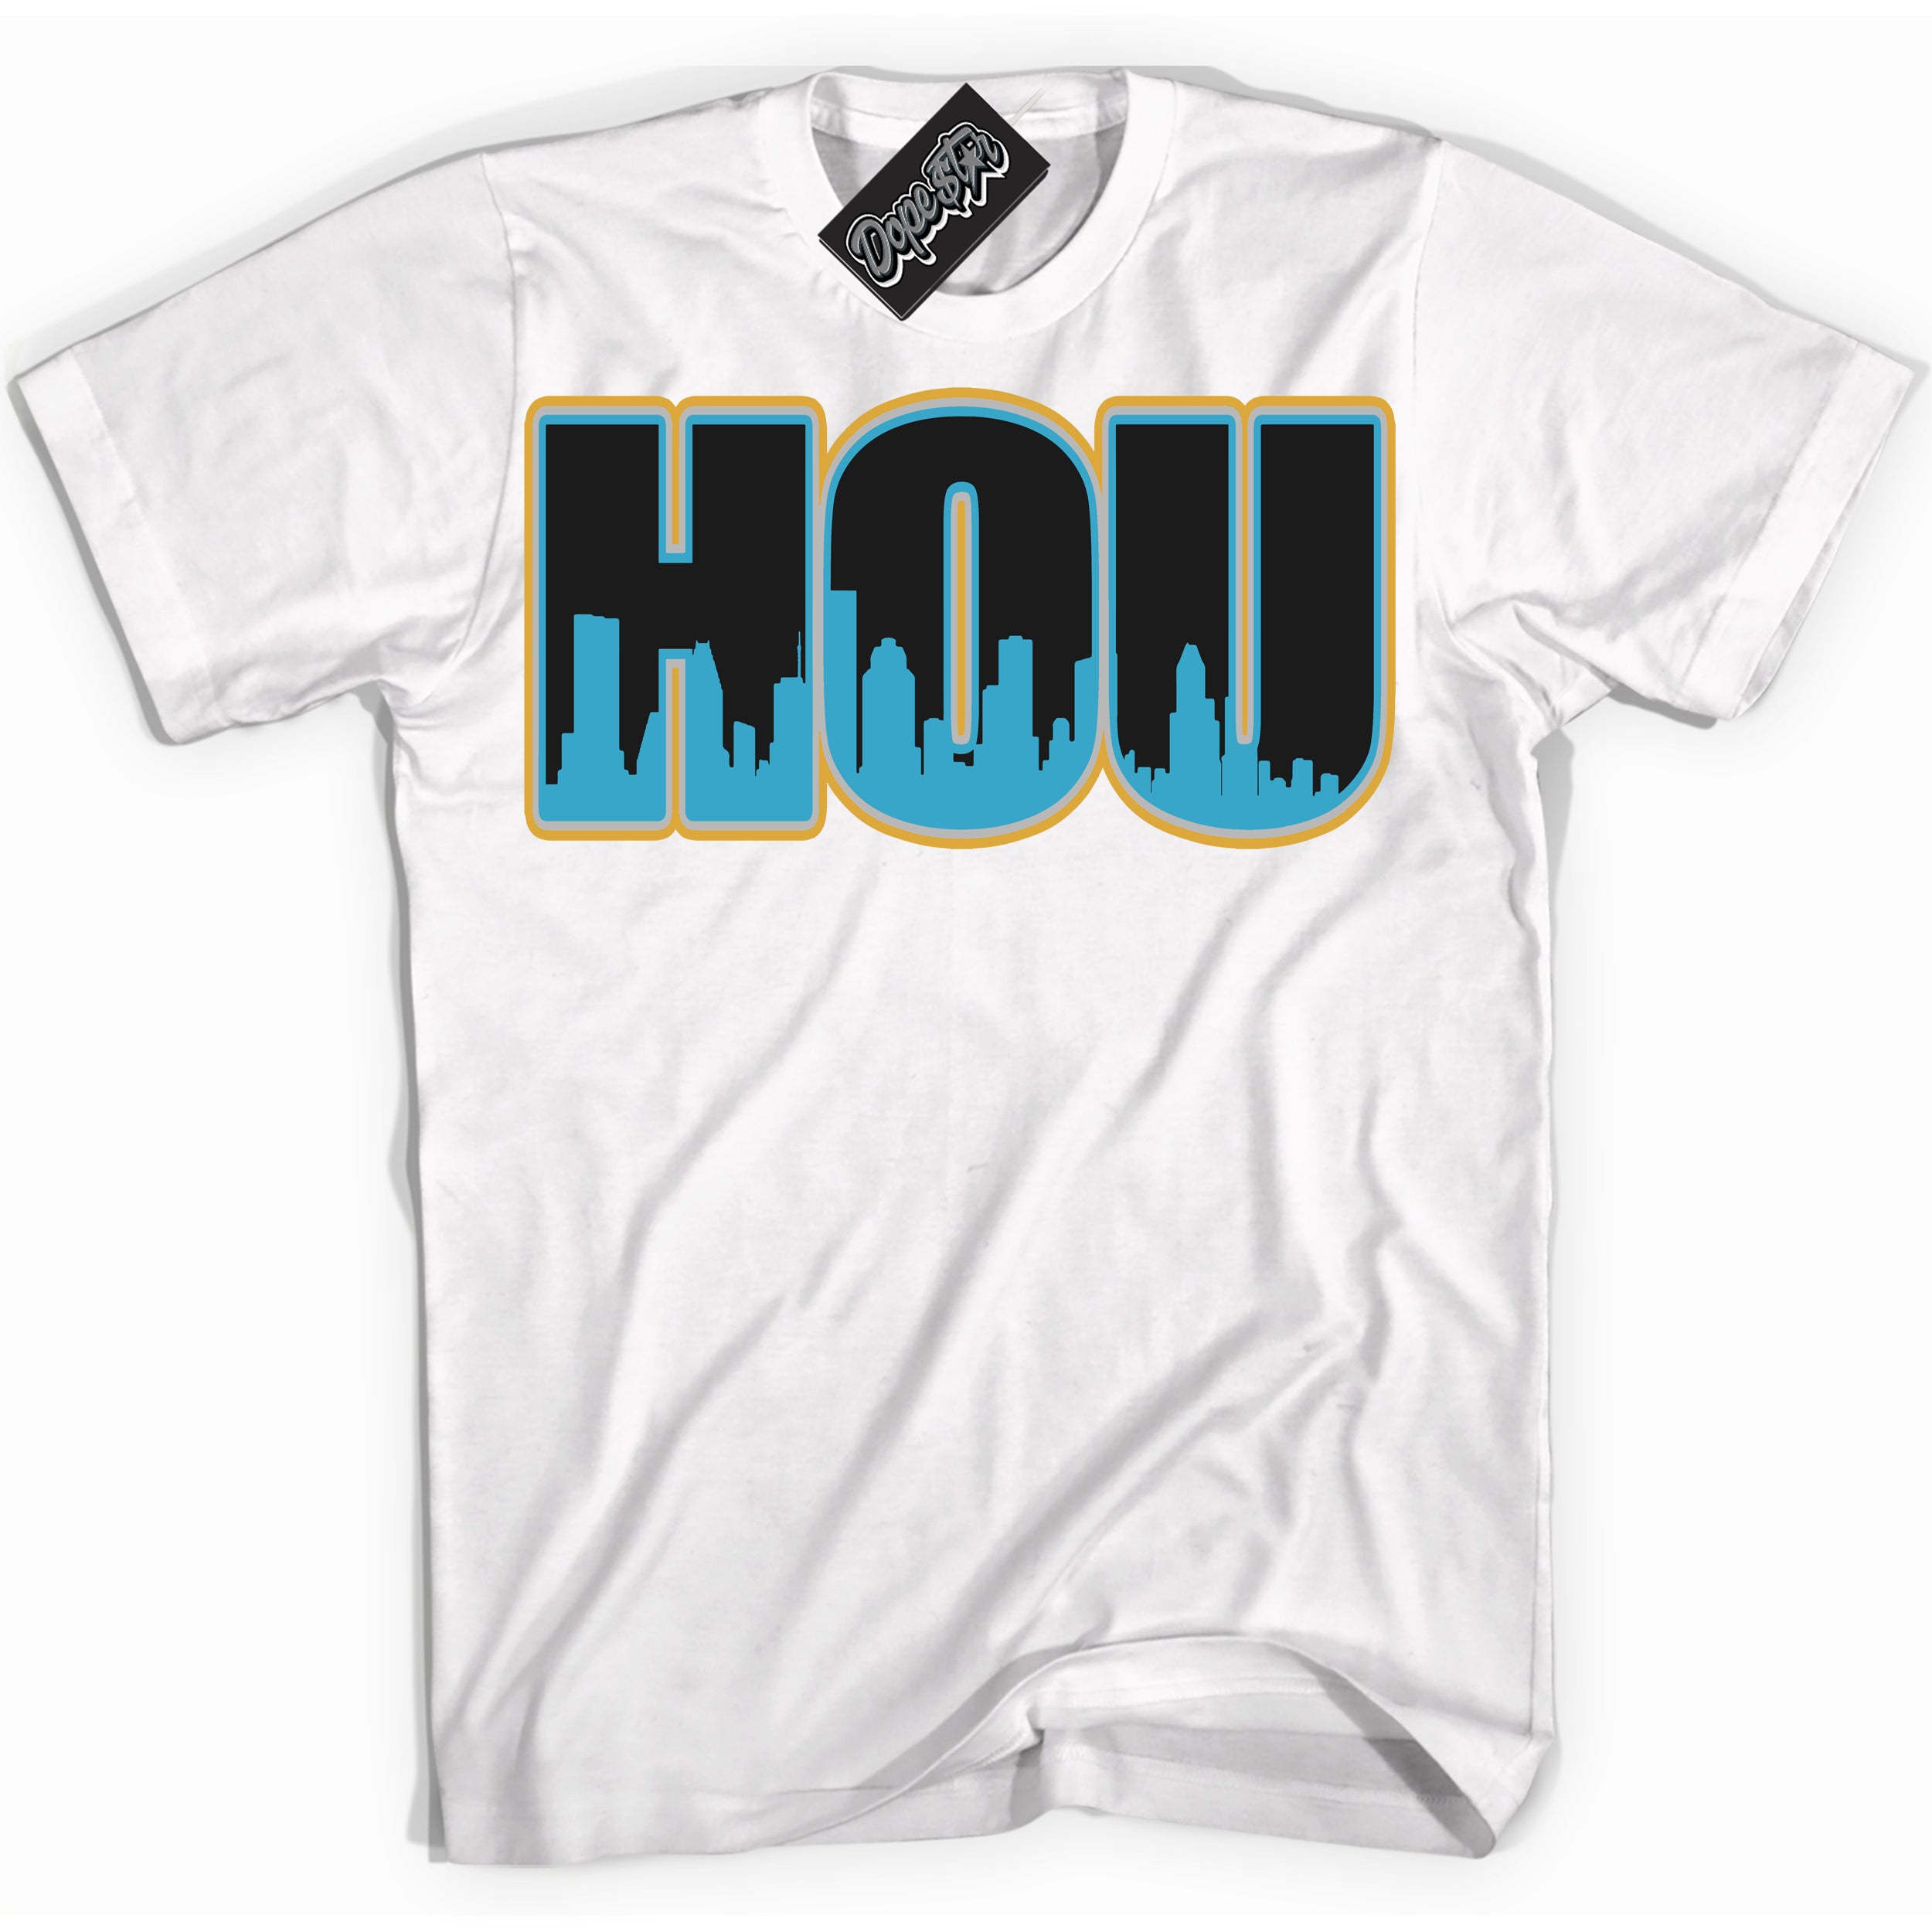 Cool White Shirt with “ Houston” design that perfectly matches Aqua 5s Sneakers.